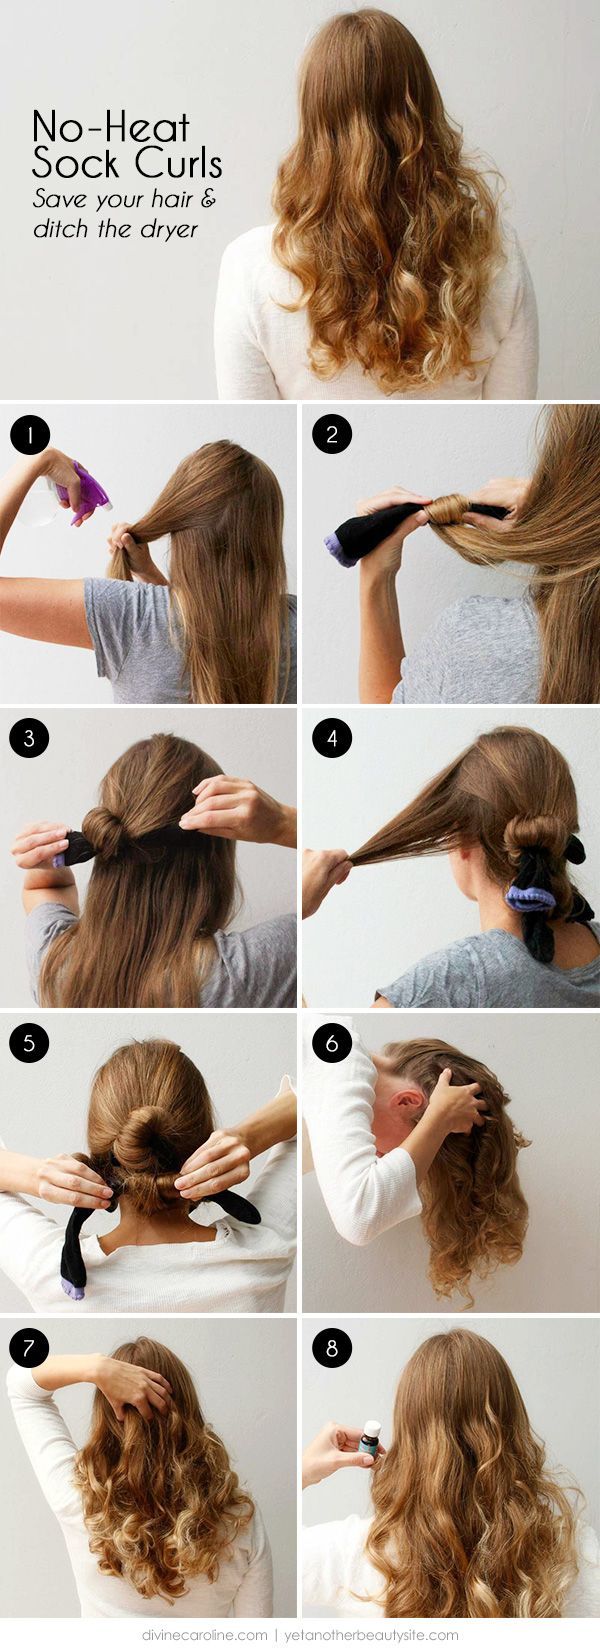 10 Amazing No-Heat Hairstyles You Need To Know